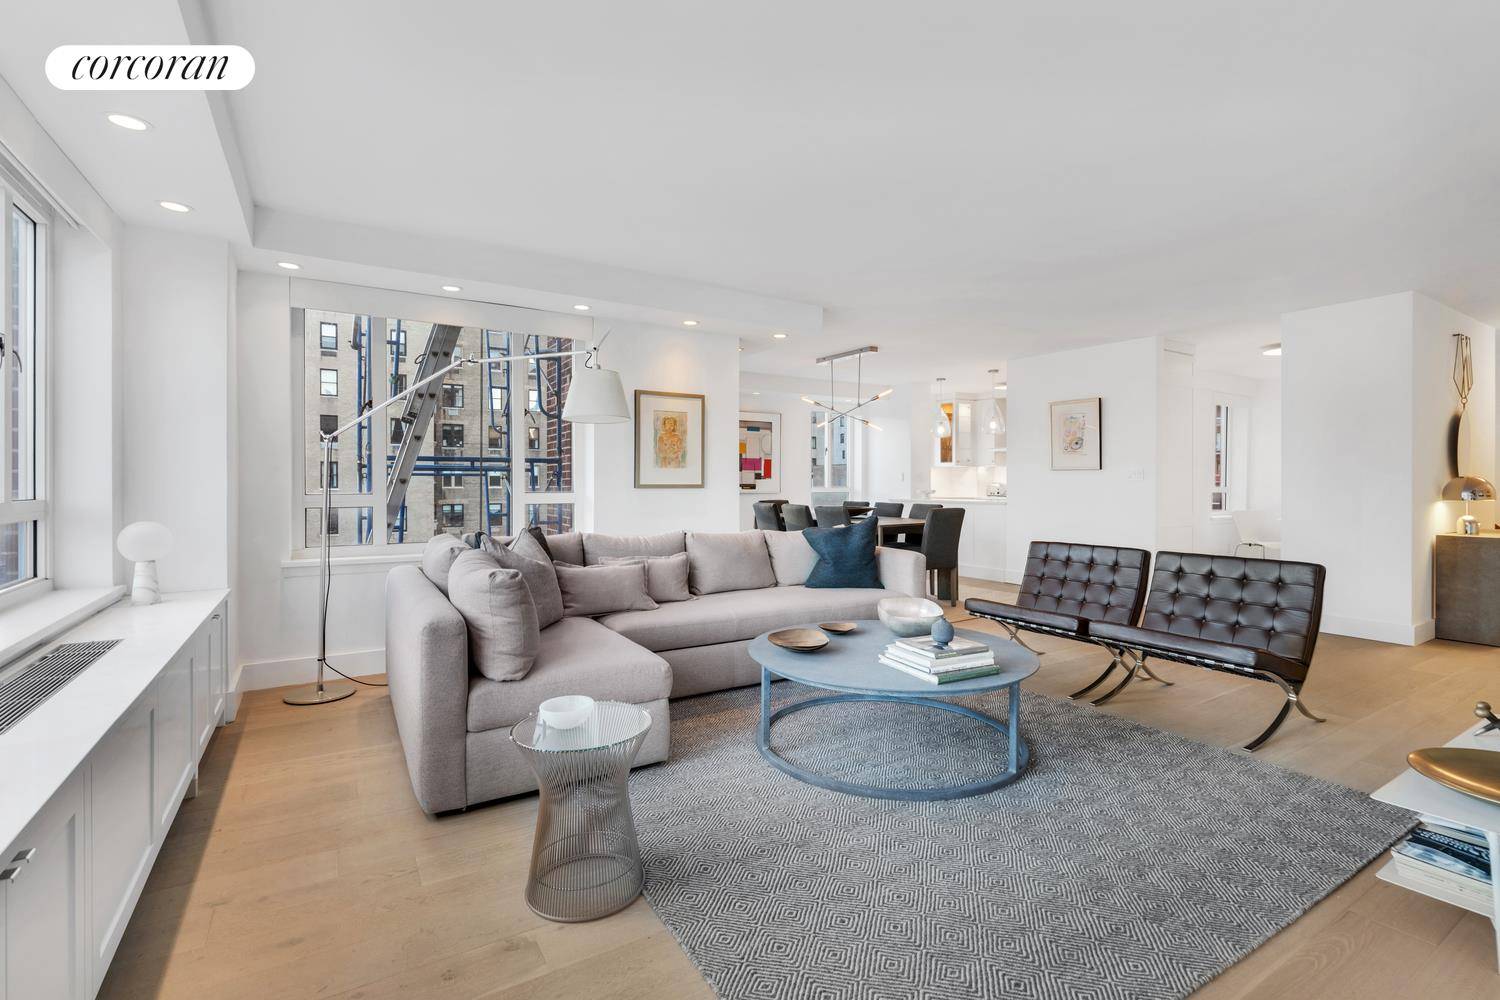 A truly perfect apartment, right off Madison Avenue.